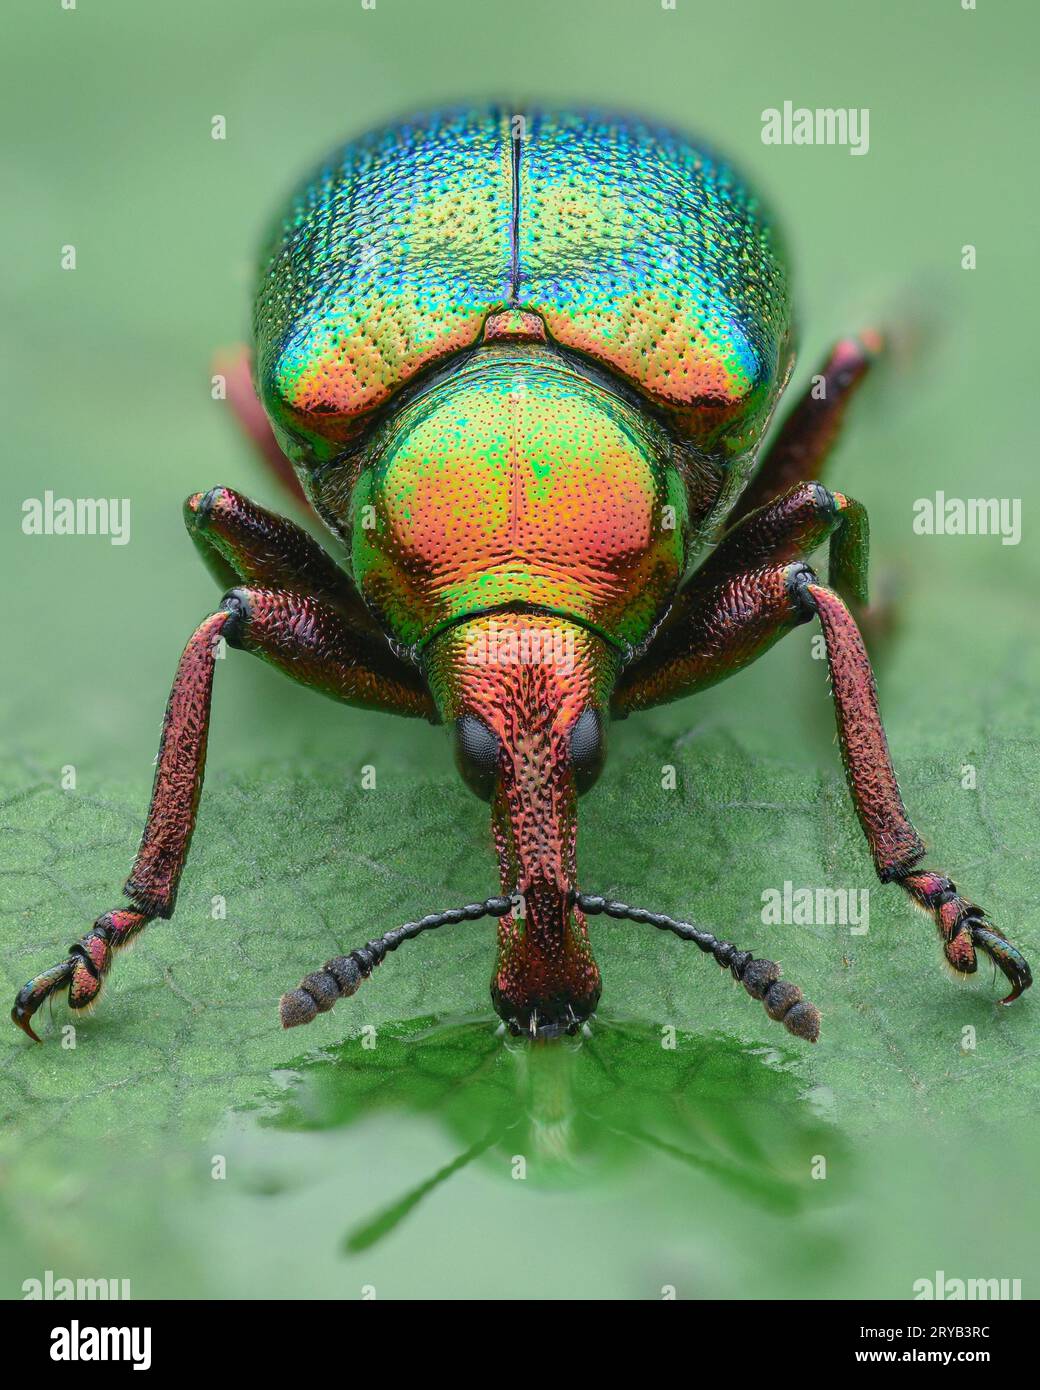 Portrait of a multicolored, iridescent leaf-rolling weevil with blue, green, and red colors, drinking water on a leaf (Byctiscus betulae) Stock Photo